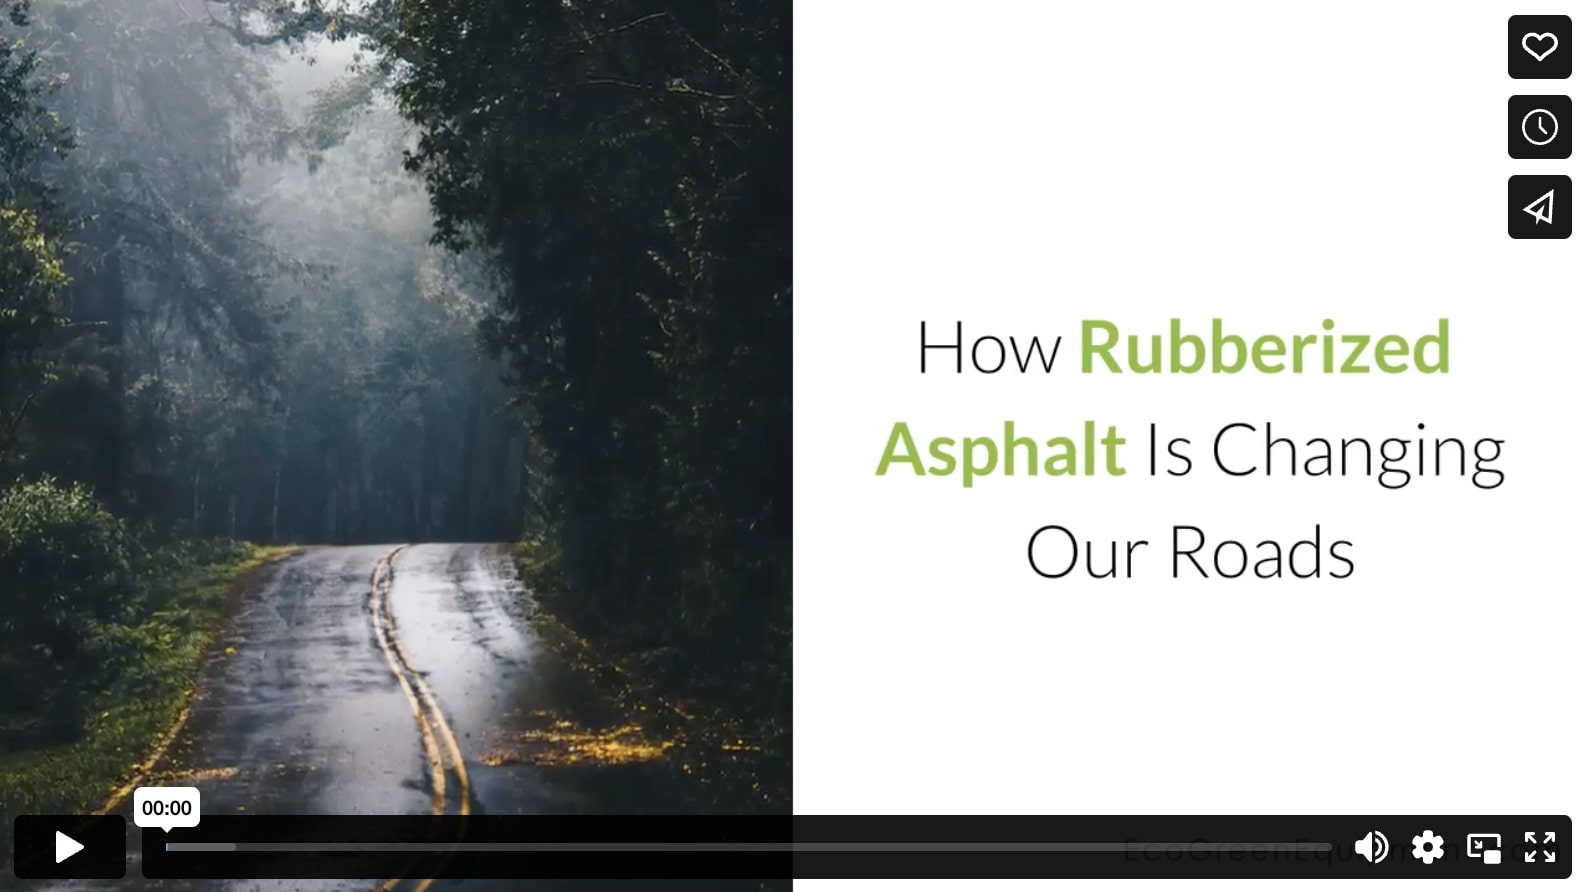 How Rubberized Asphalt Is Changing Our Roads